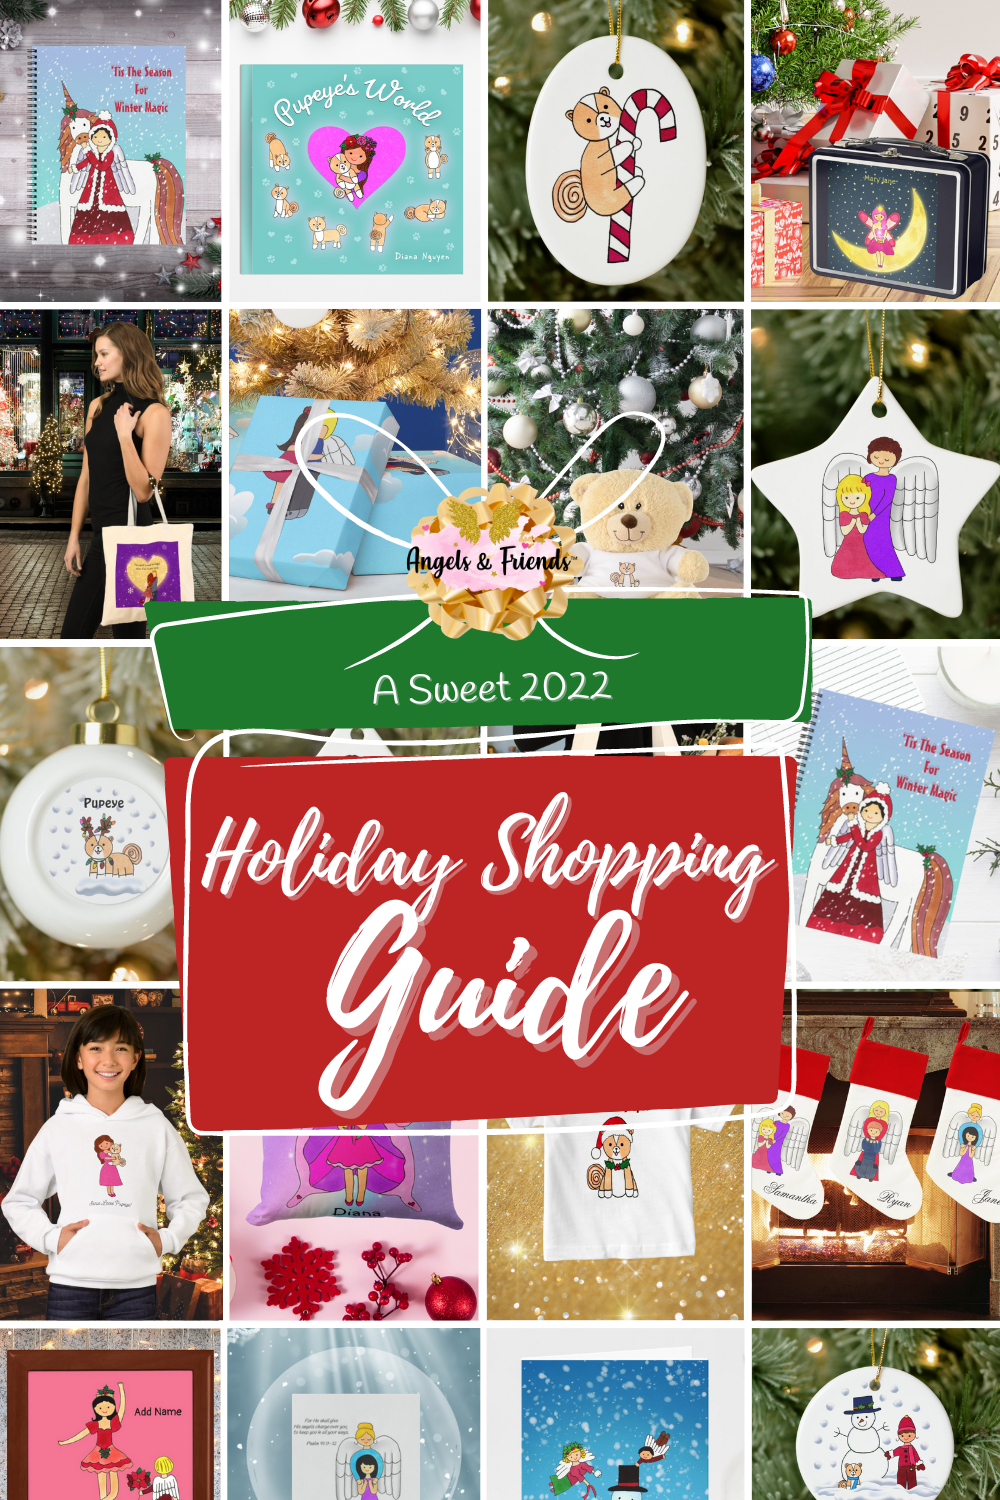 A Sweet 2022 Holiday Shopping Guide from Angels & Friends